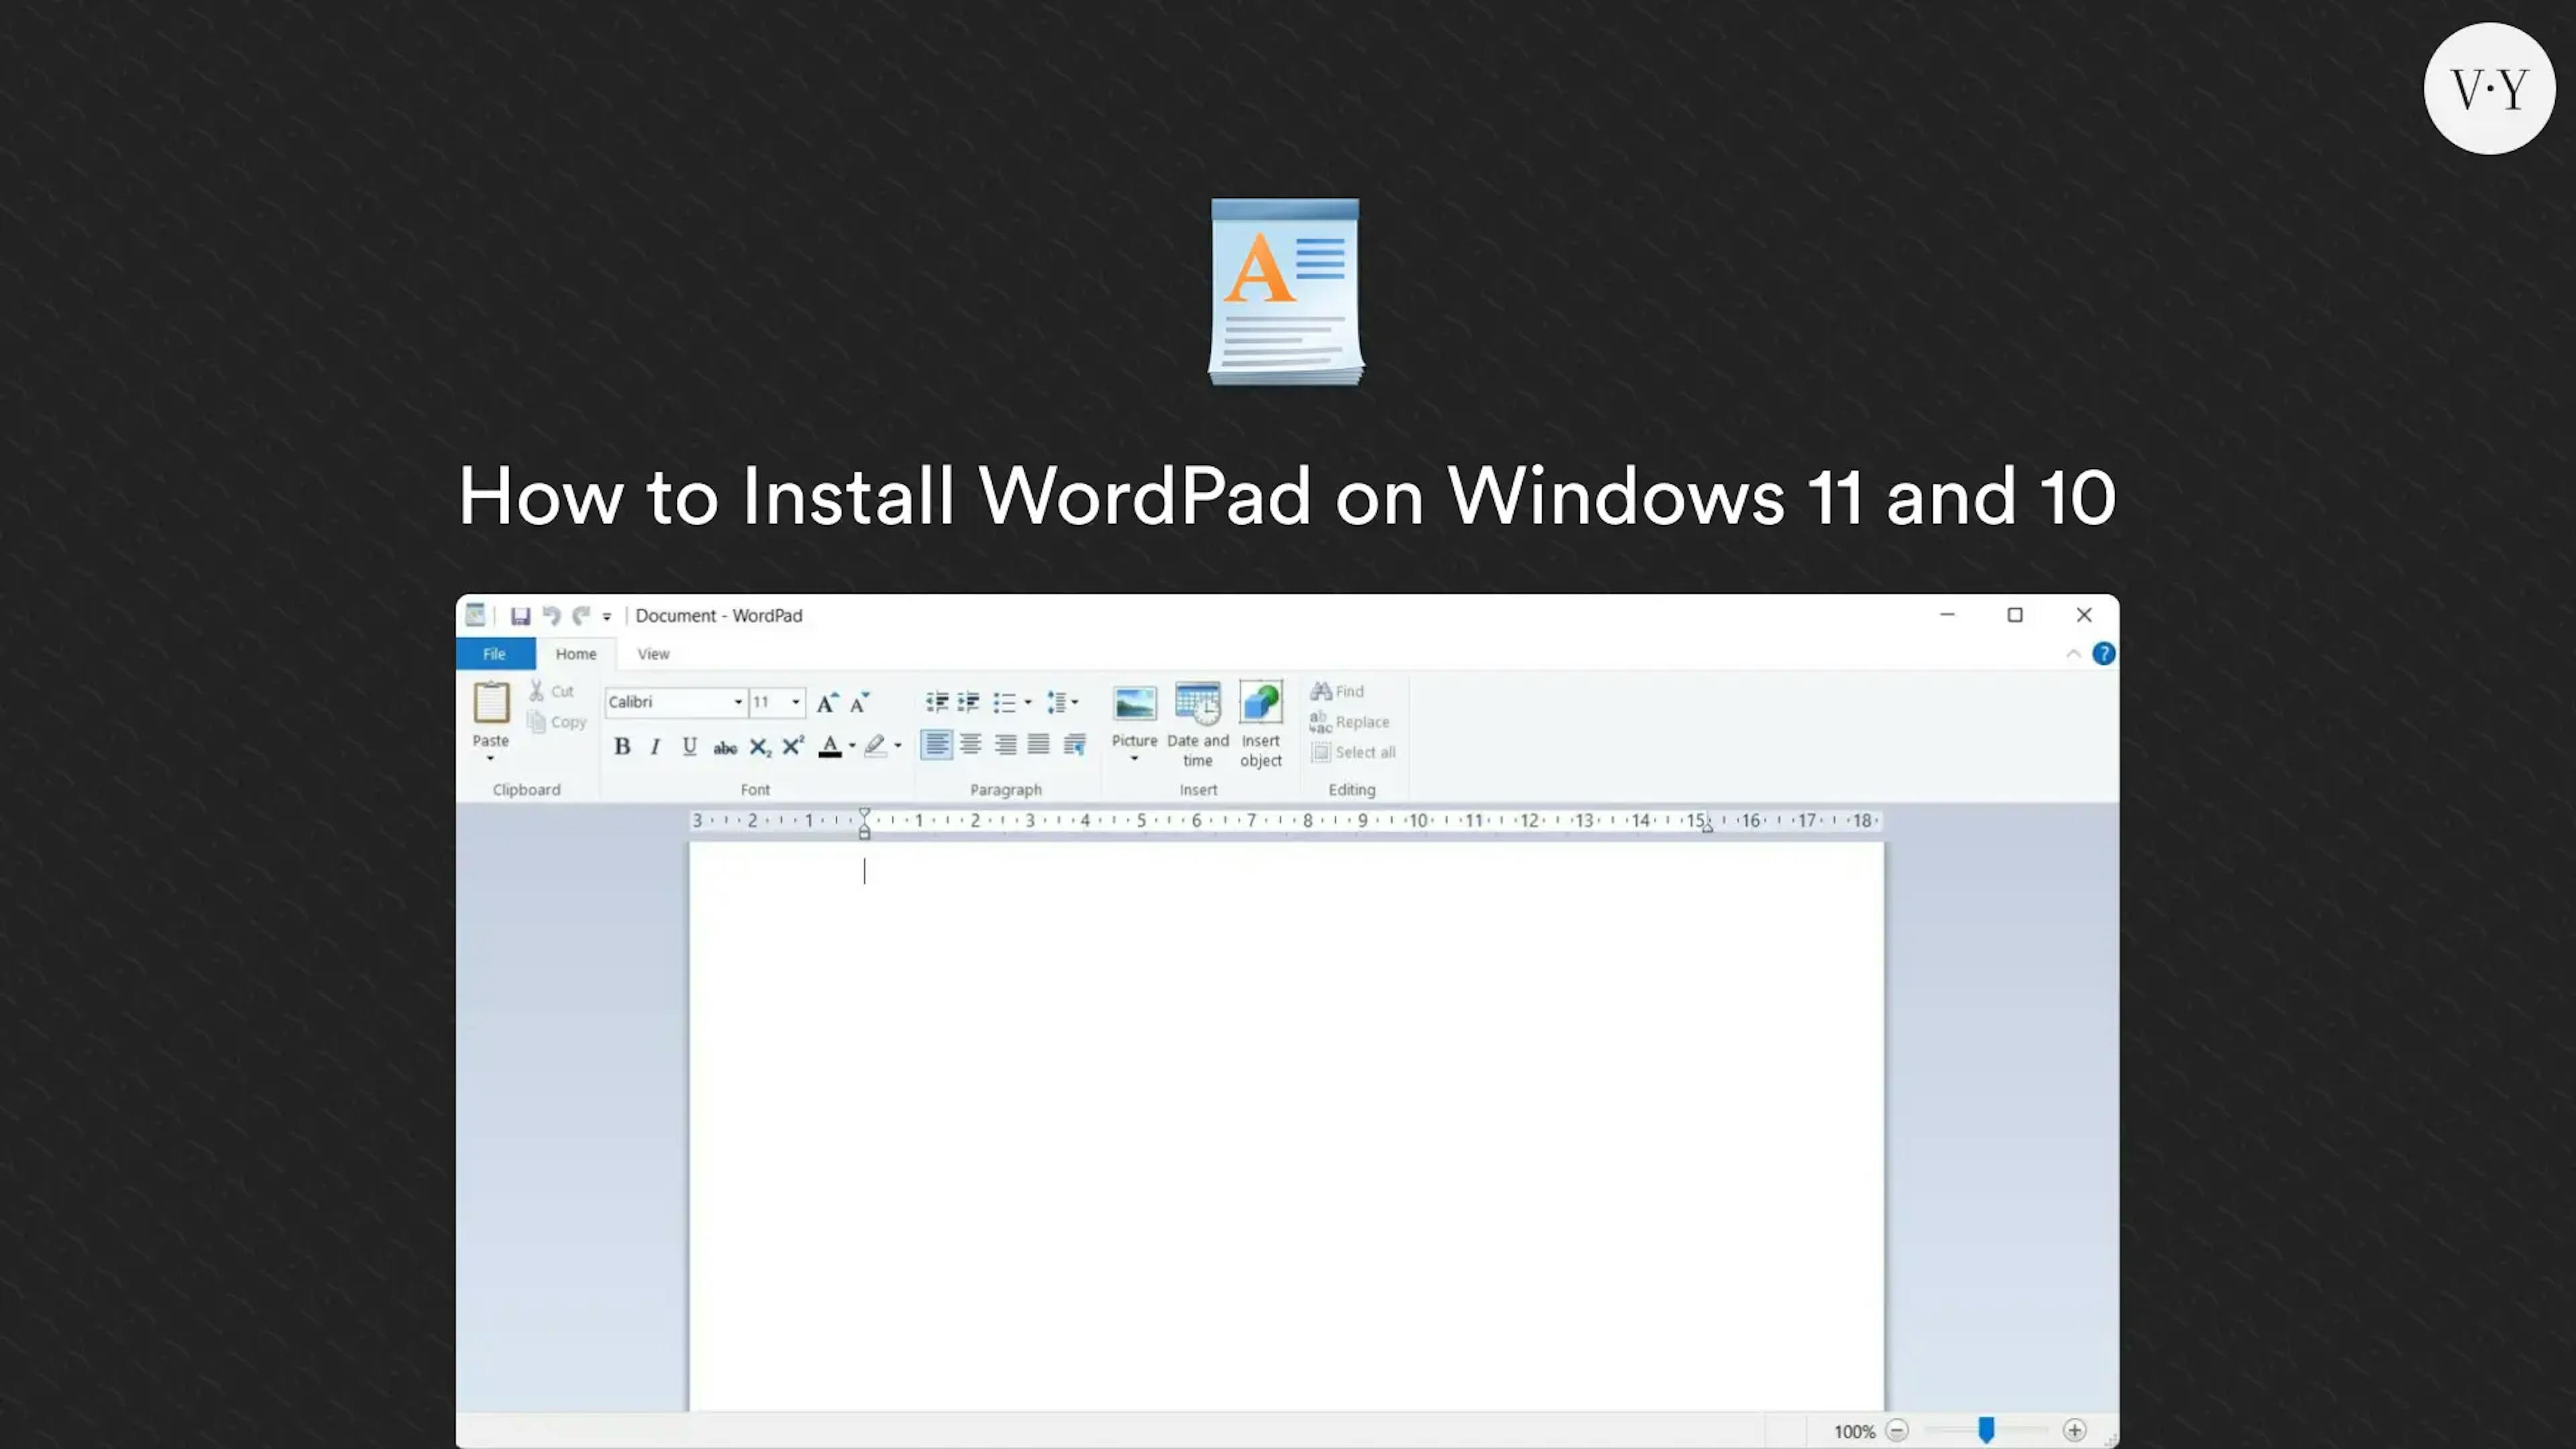 featured image - How to Install WordPad on Windows 11, 10 (in the Right Way)